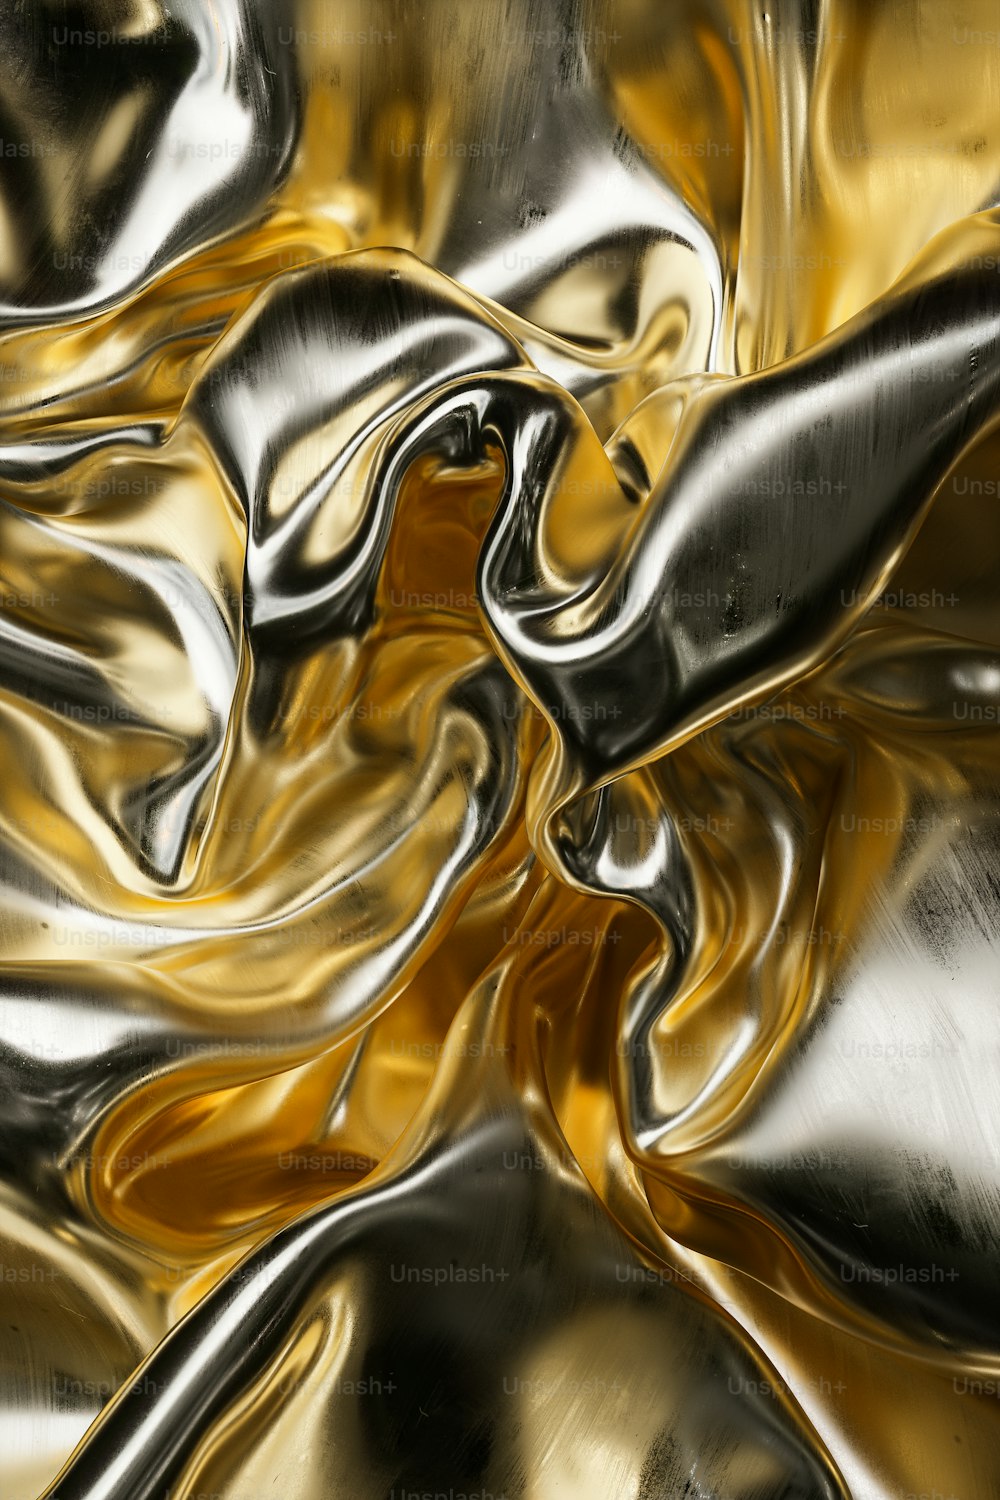 a close up of a metal surface with gold and silver colors